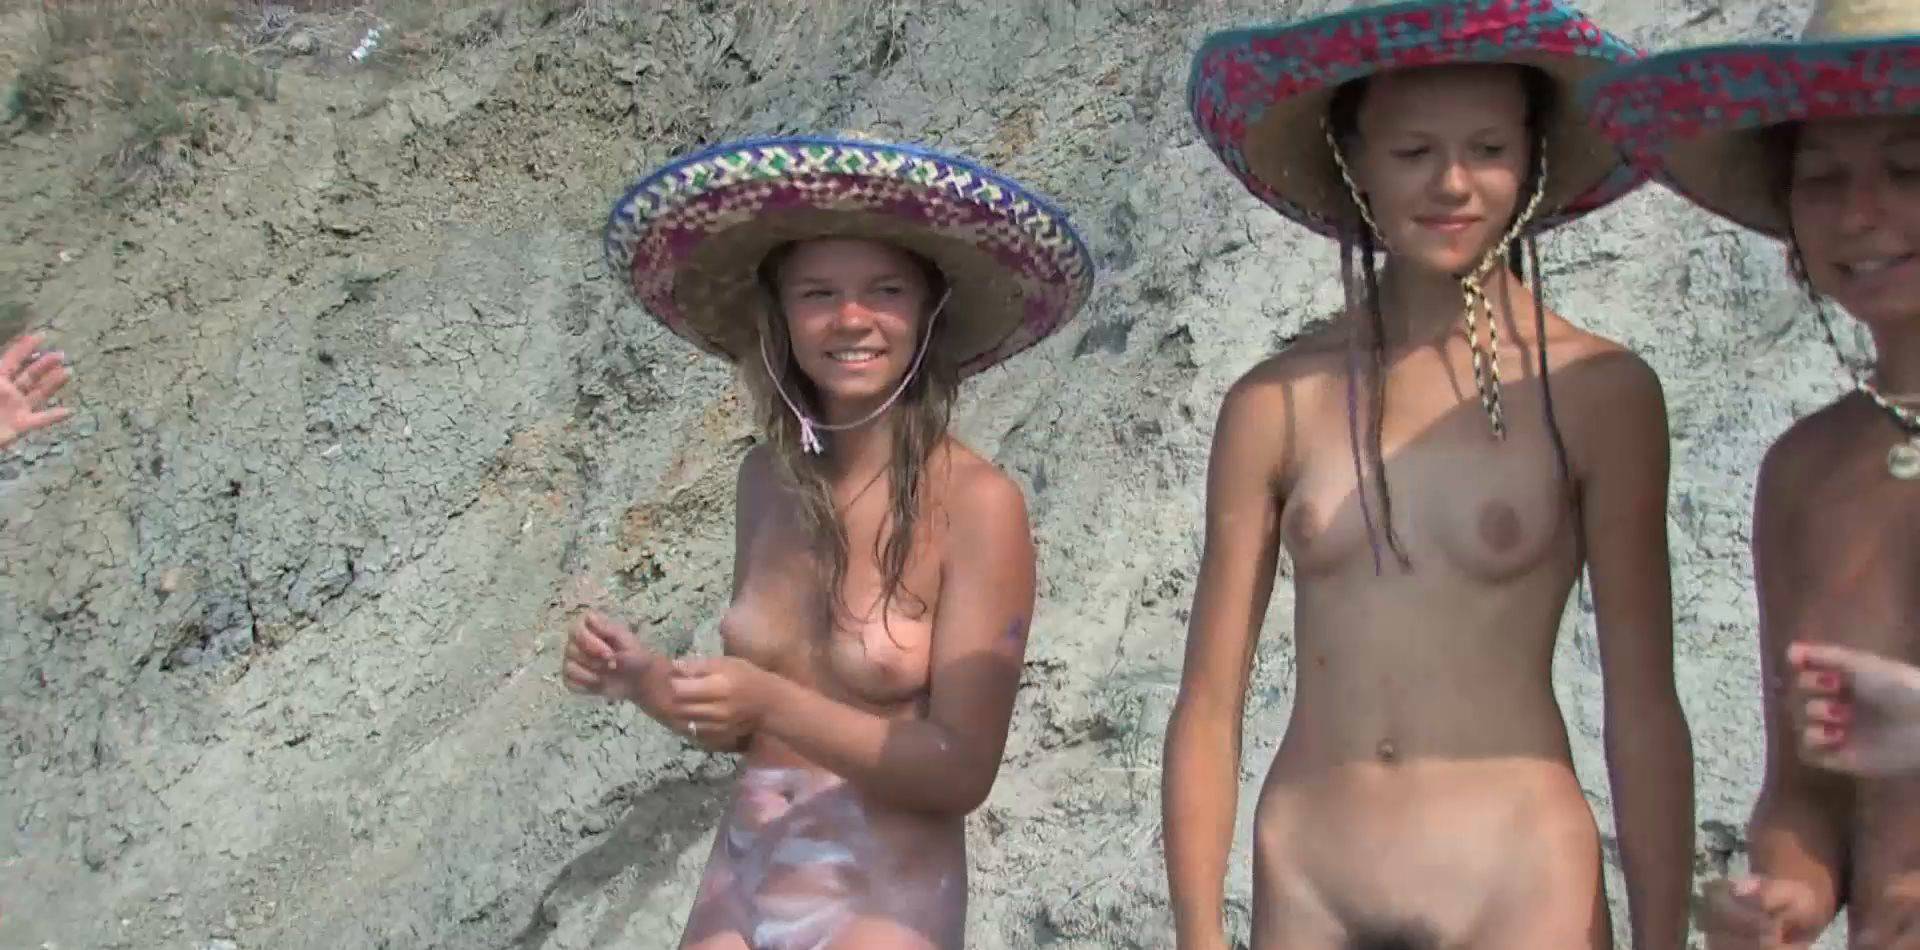 Candid-HD Videos Mom and Daughter Beach Games 1 - 1